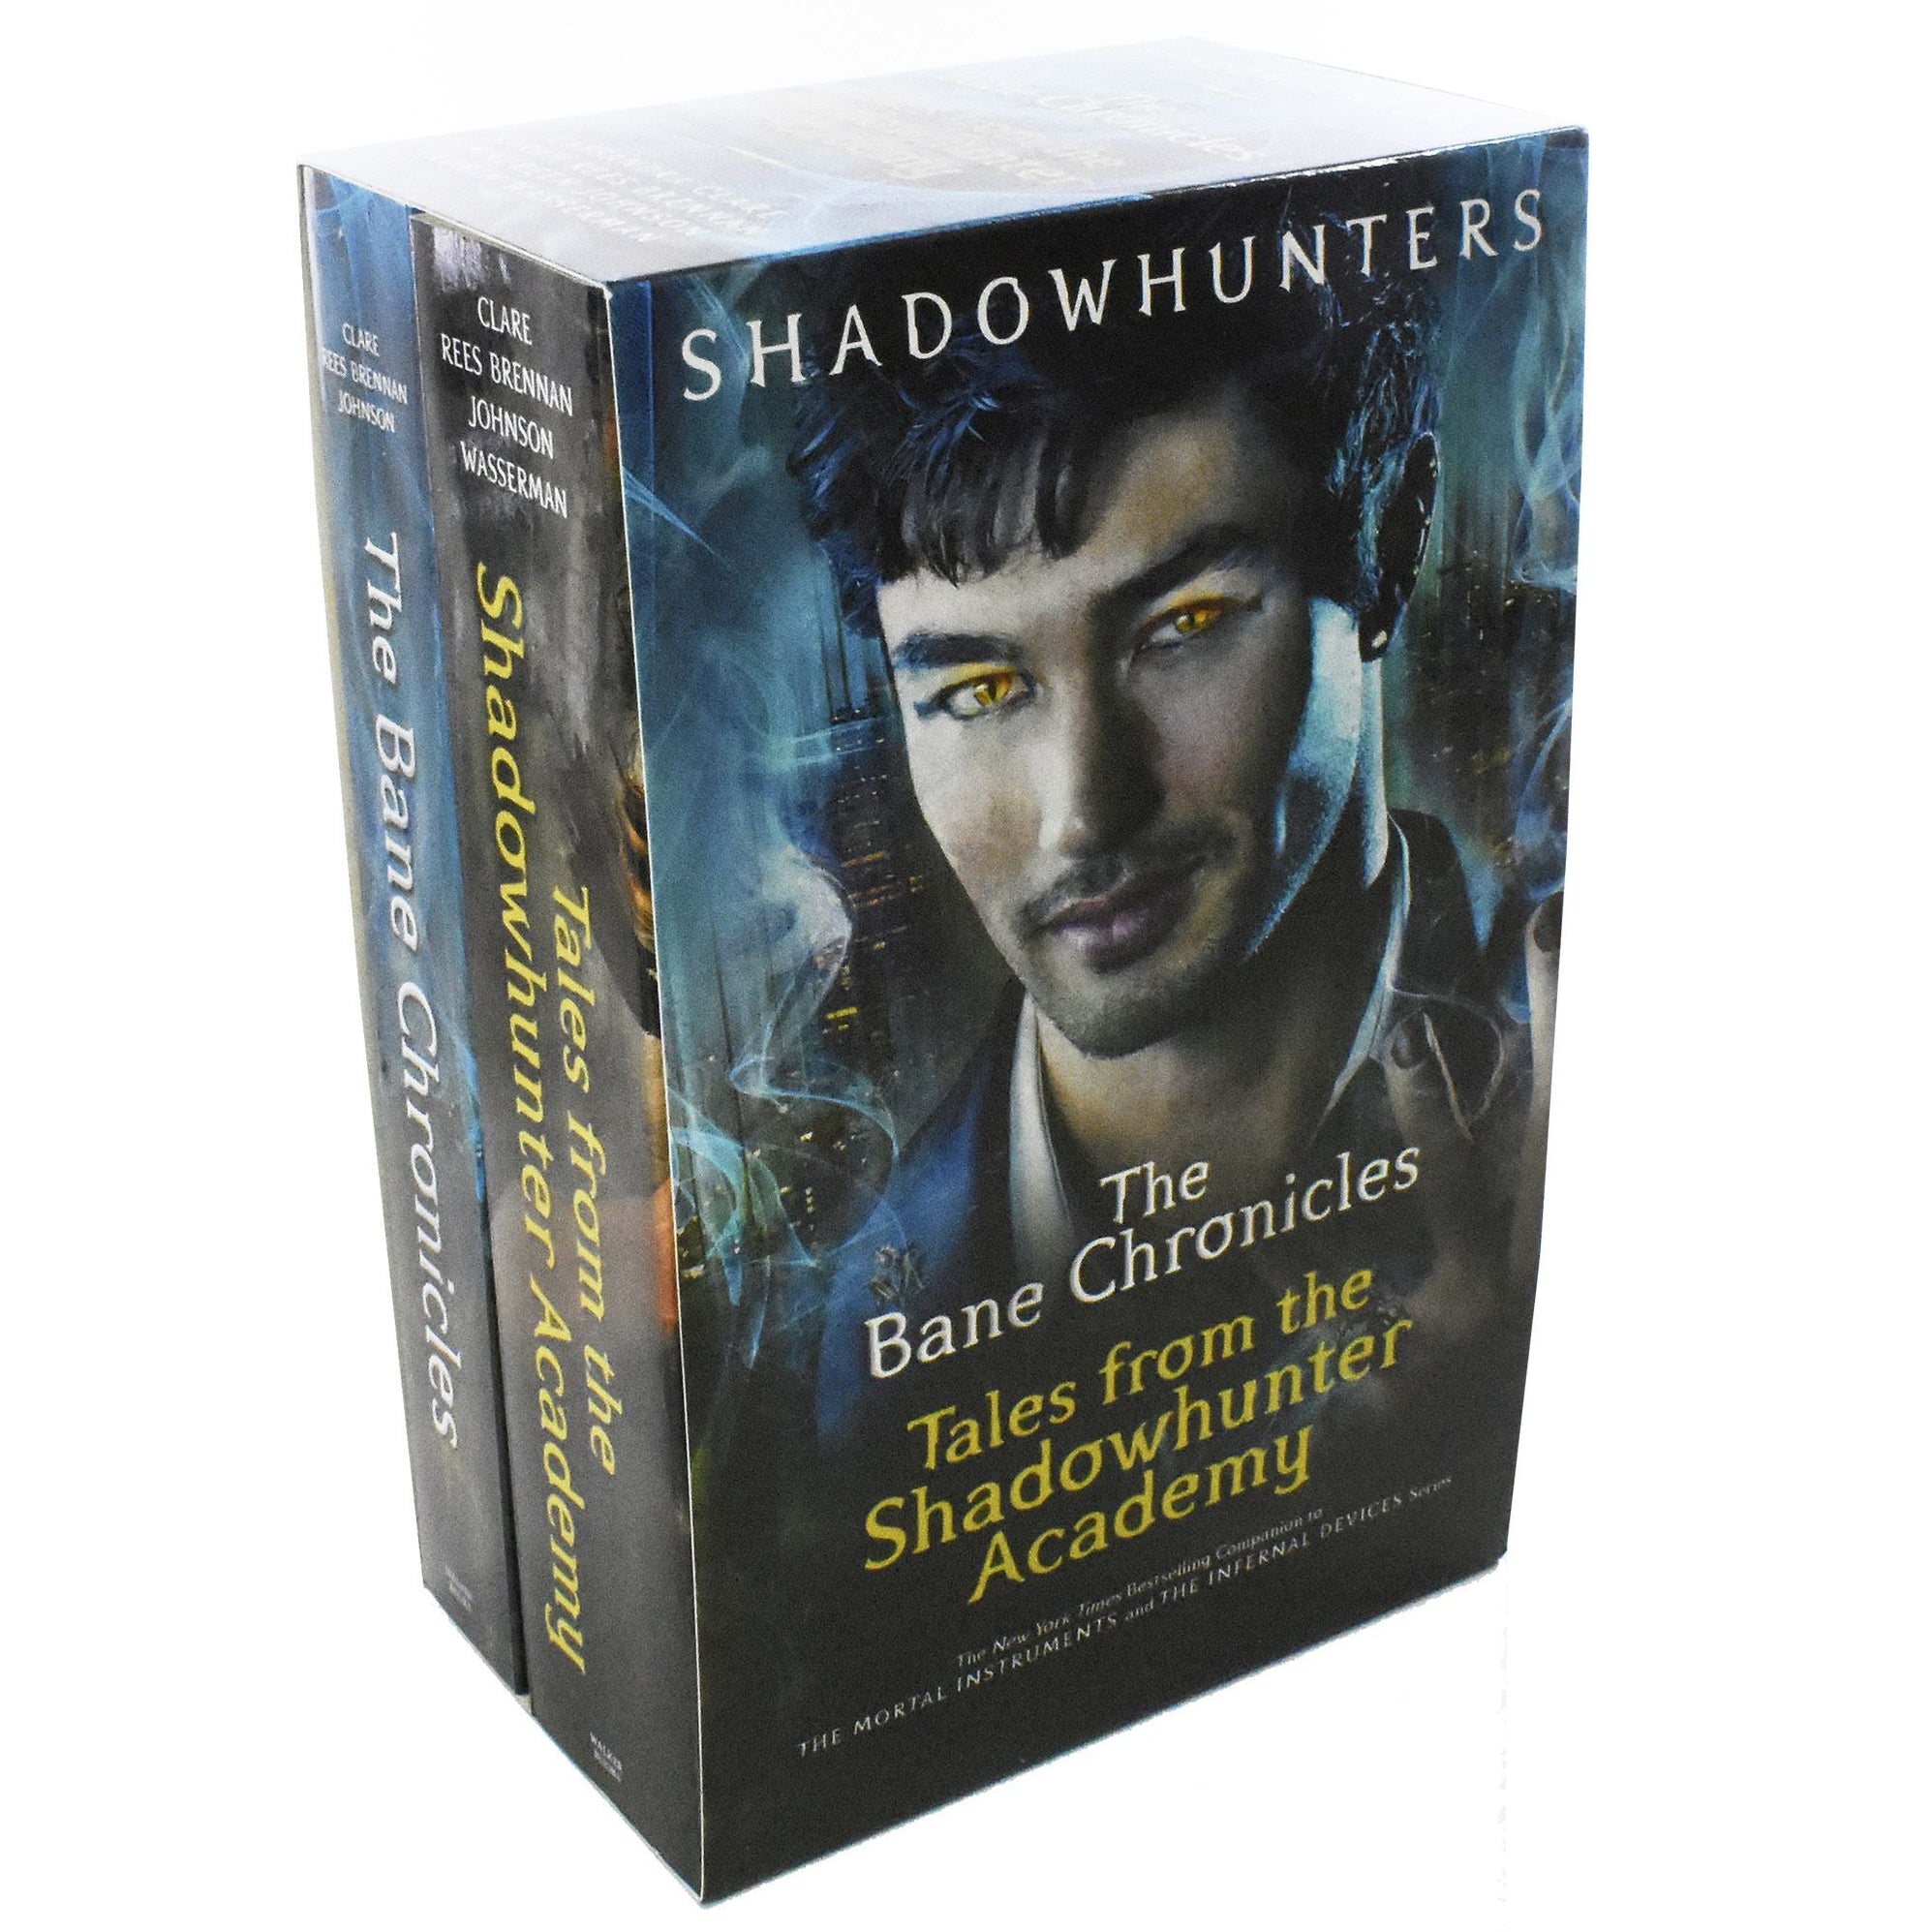 tales from the shadowhunter academy books